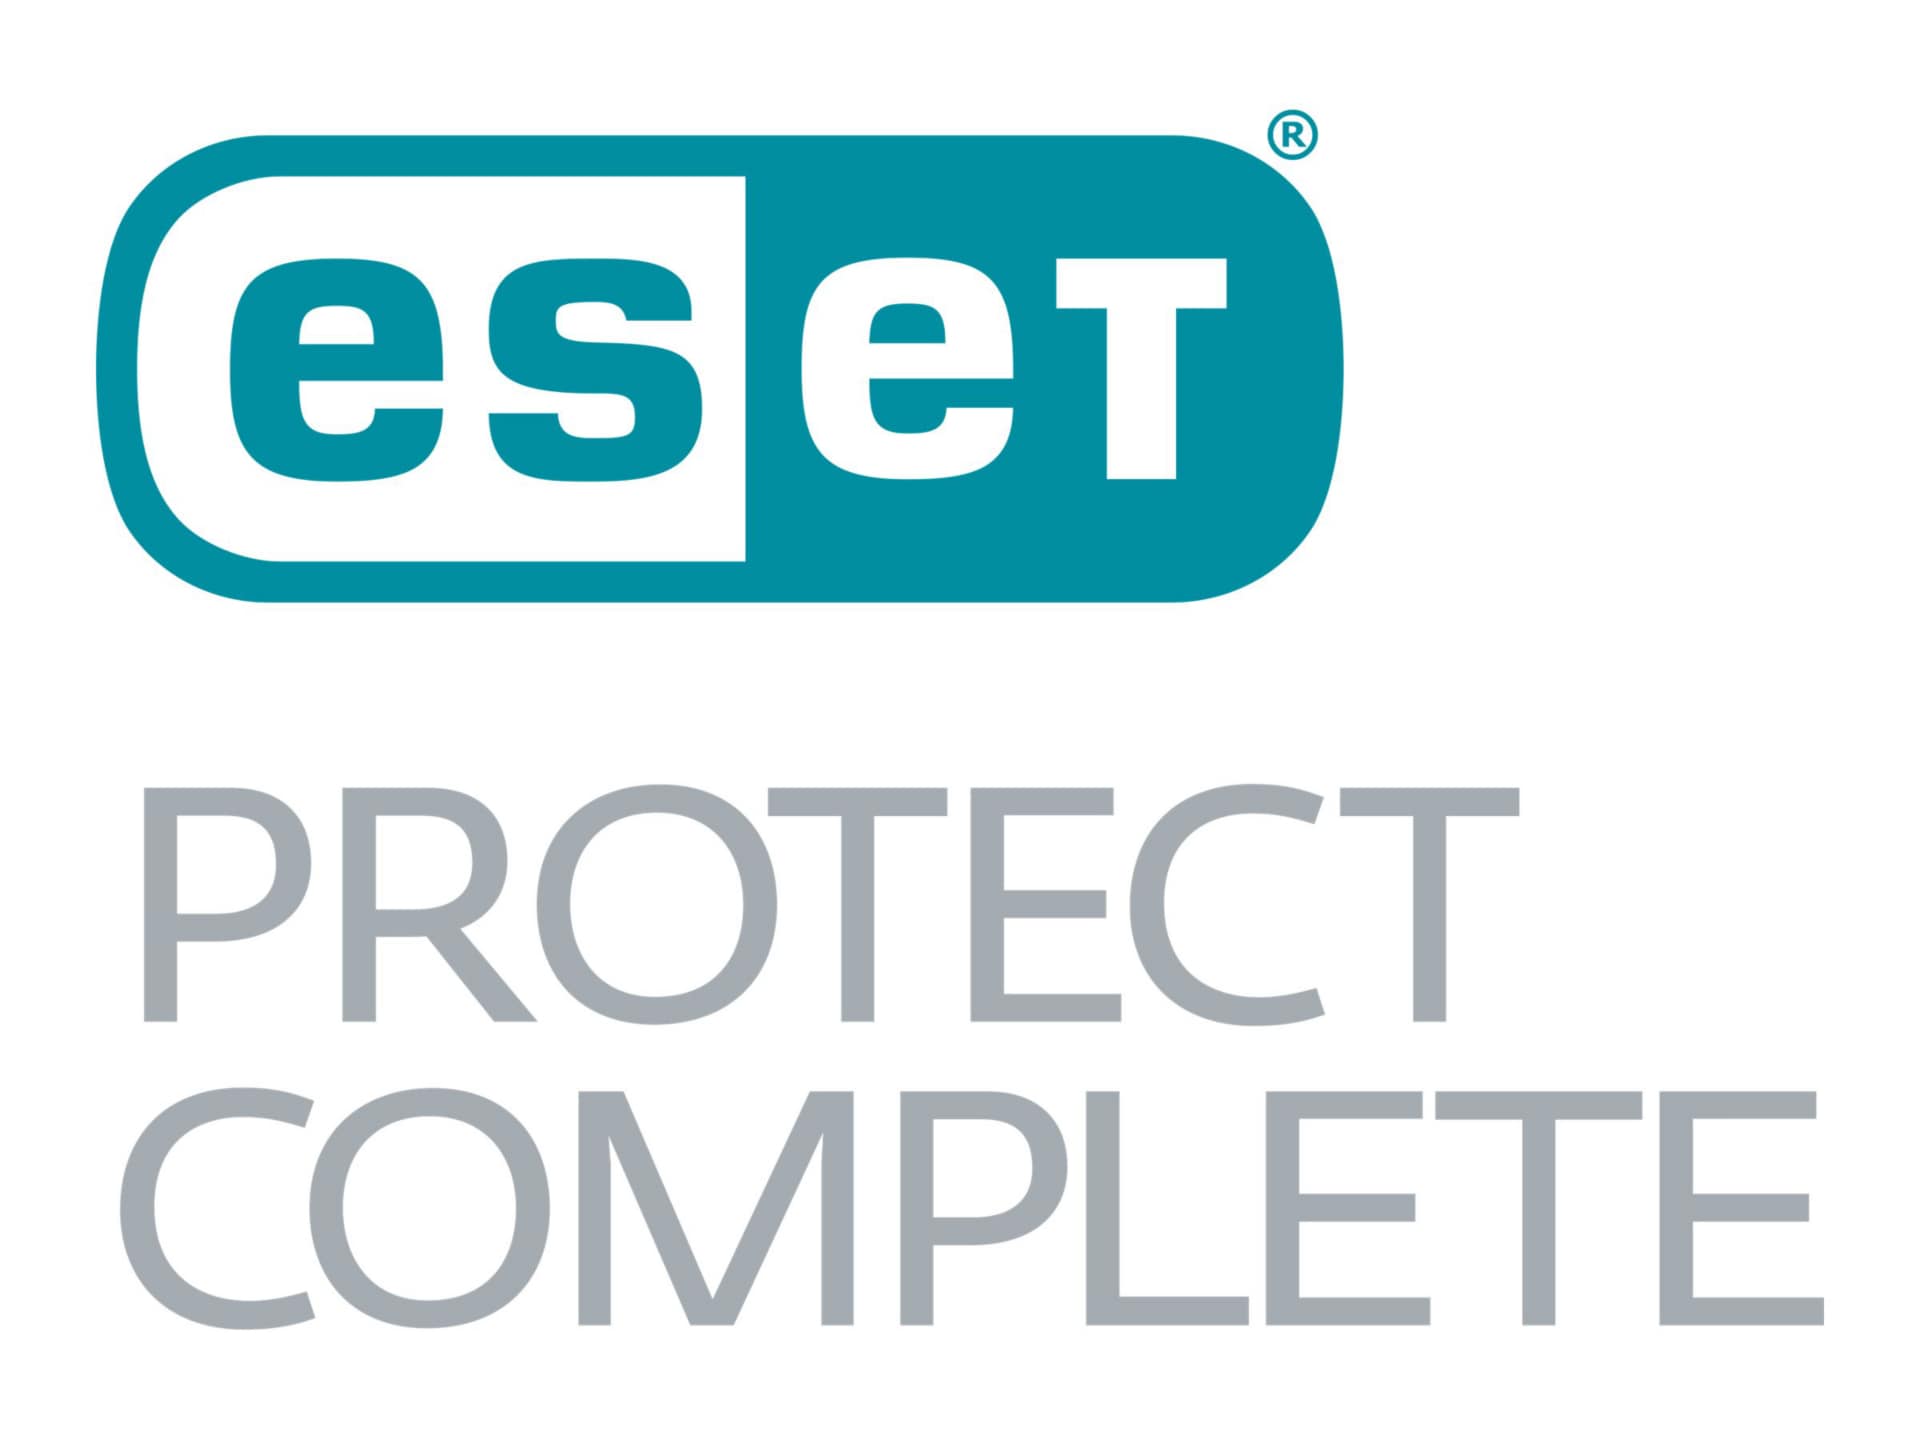 ESET PROTECT Complete - subscription license renewal (2 years) - 1 seat